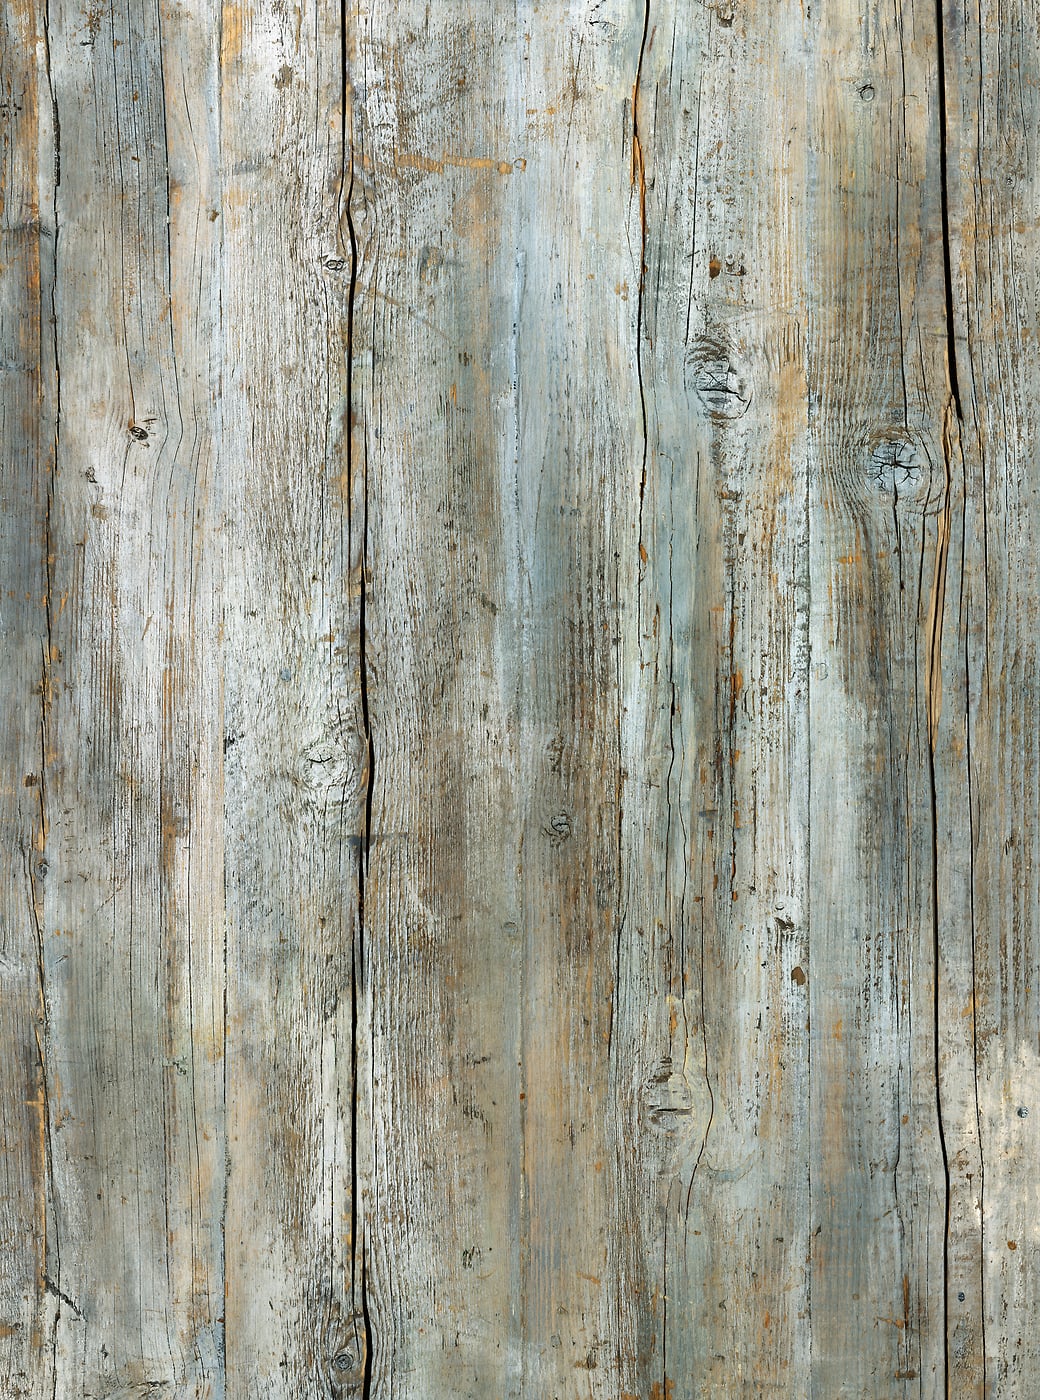 3,903 megapixels! An ultra-high-resolution texture photo file of a heavy-aged wooden plank; gigapixel photograph created by David Lineton.